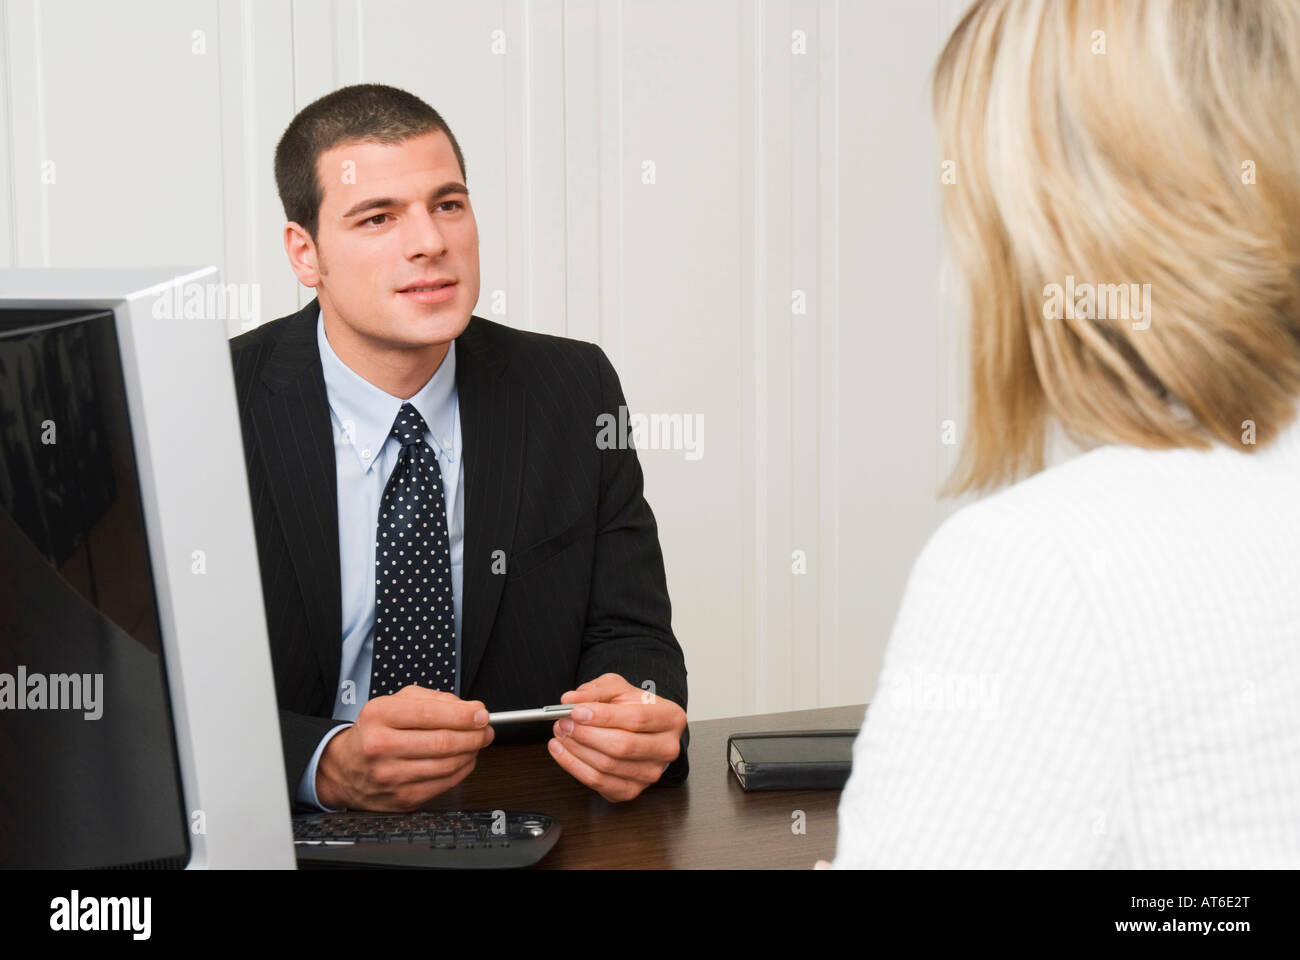 Bank representative talking with client Stock Photo